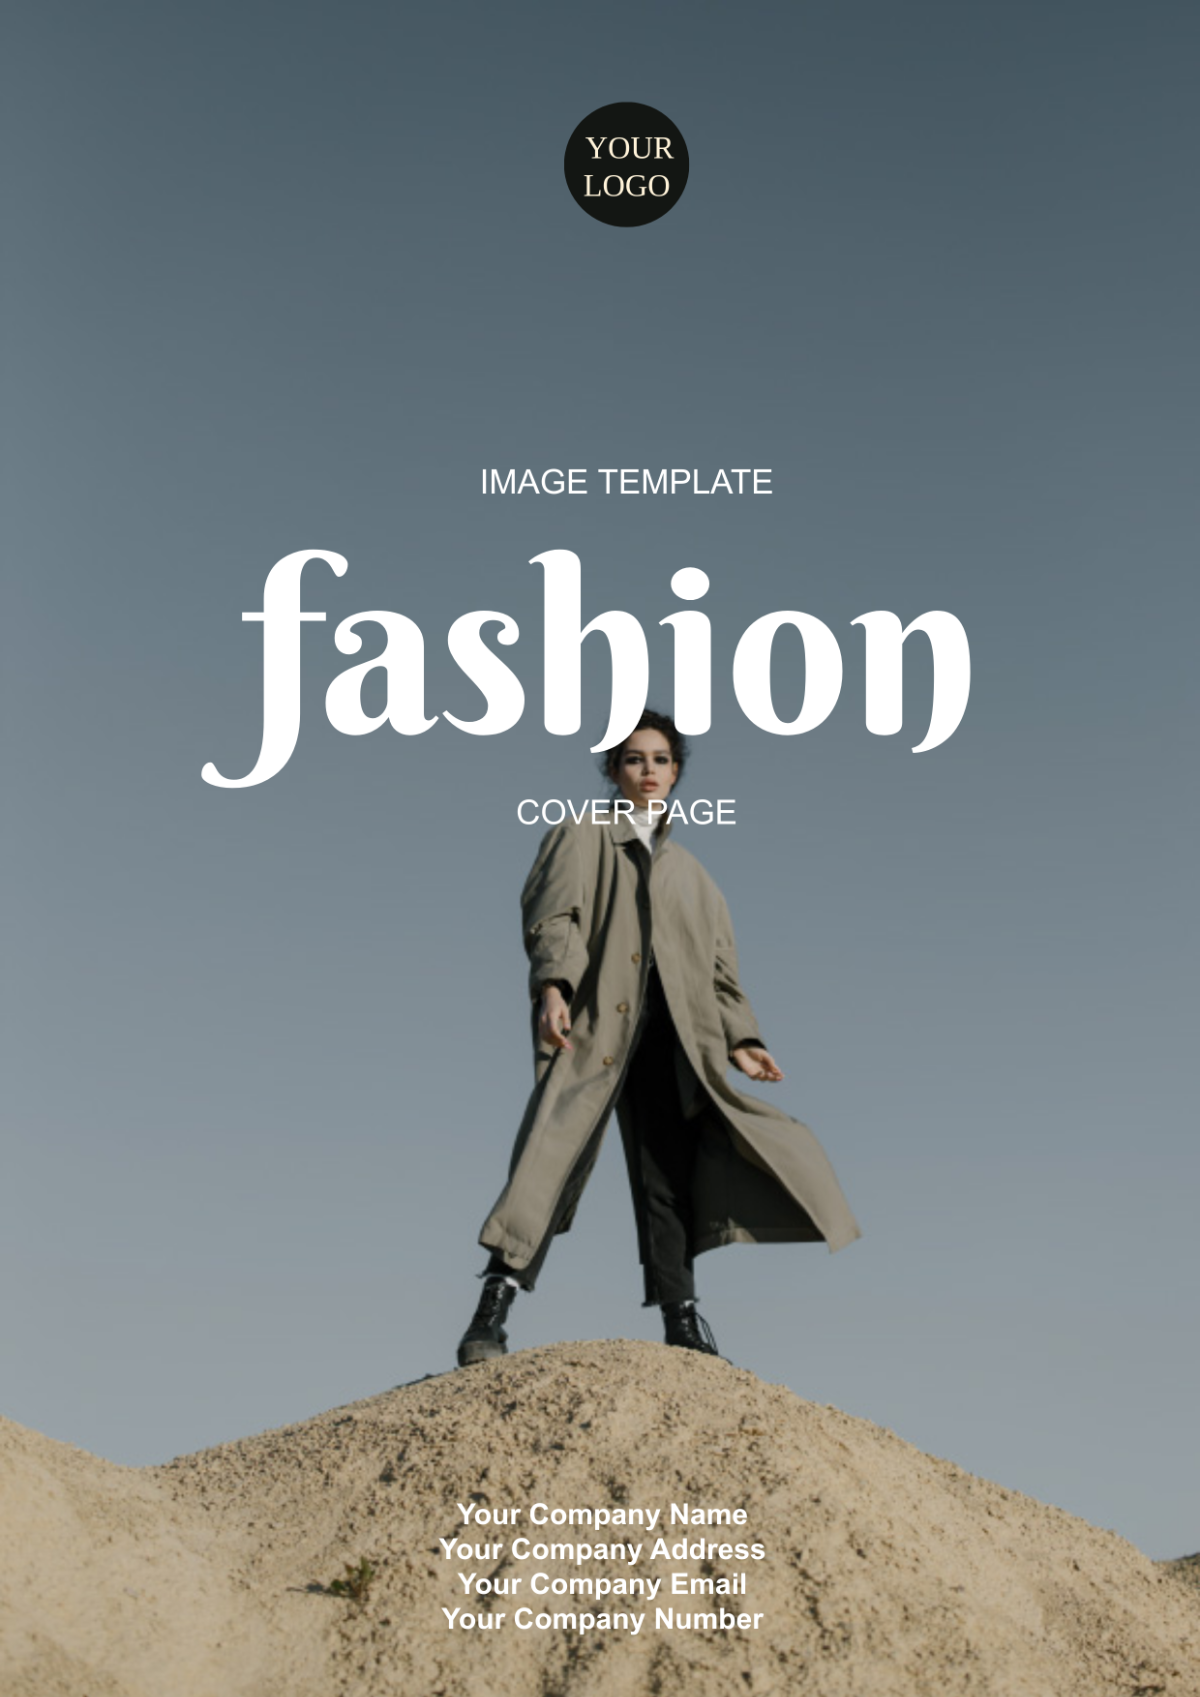 Fashion Cover Page Image